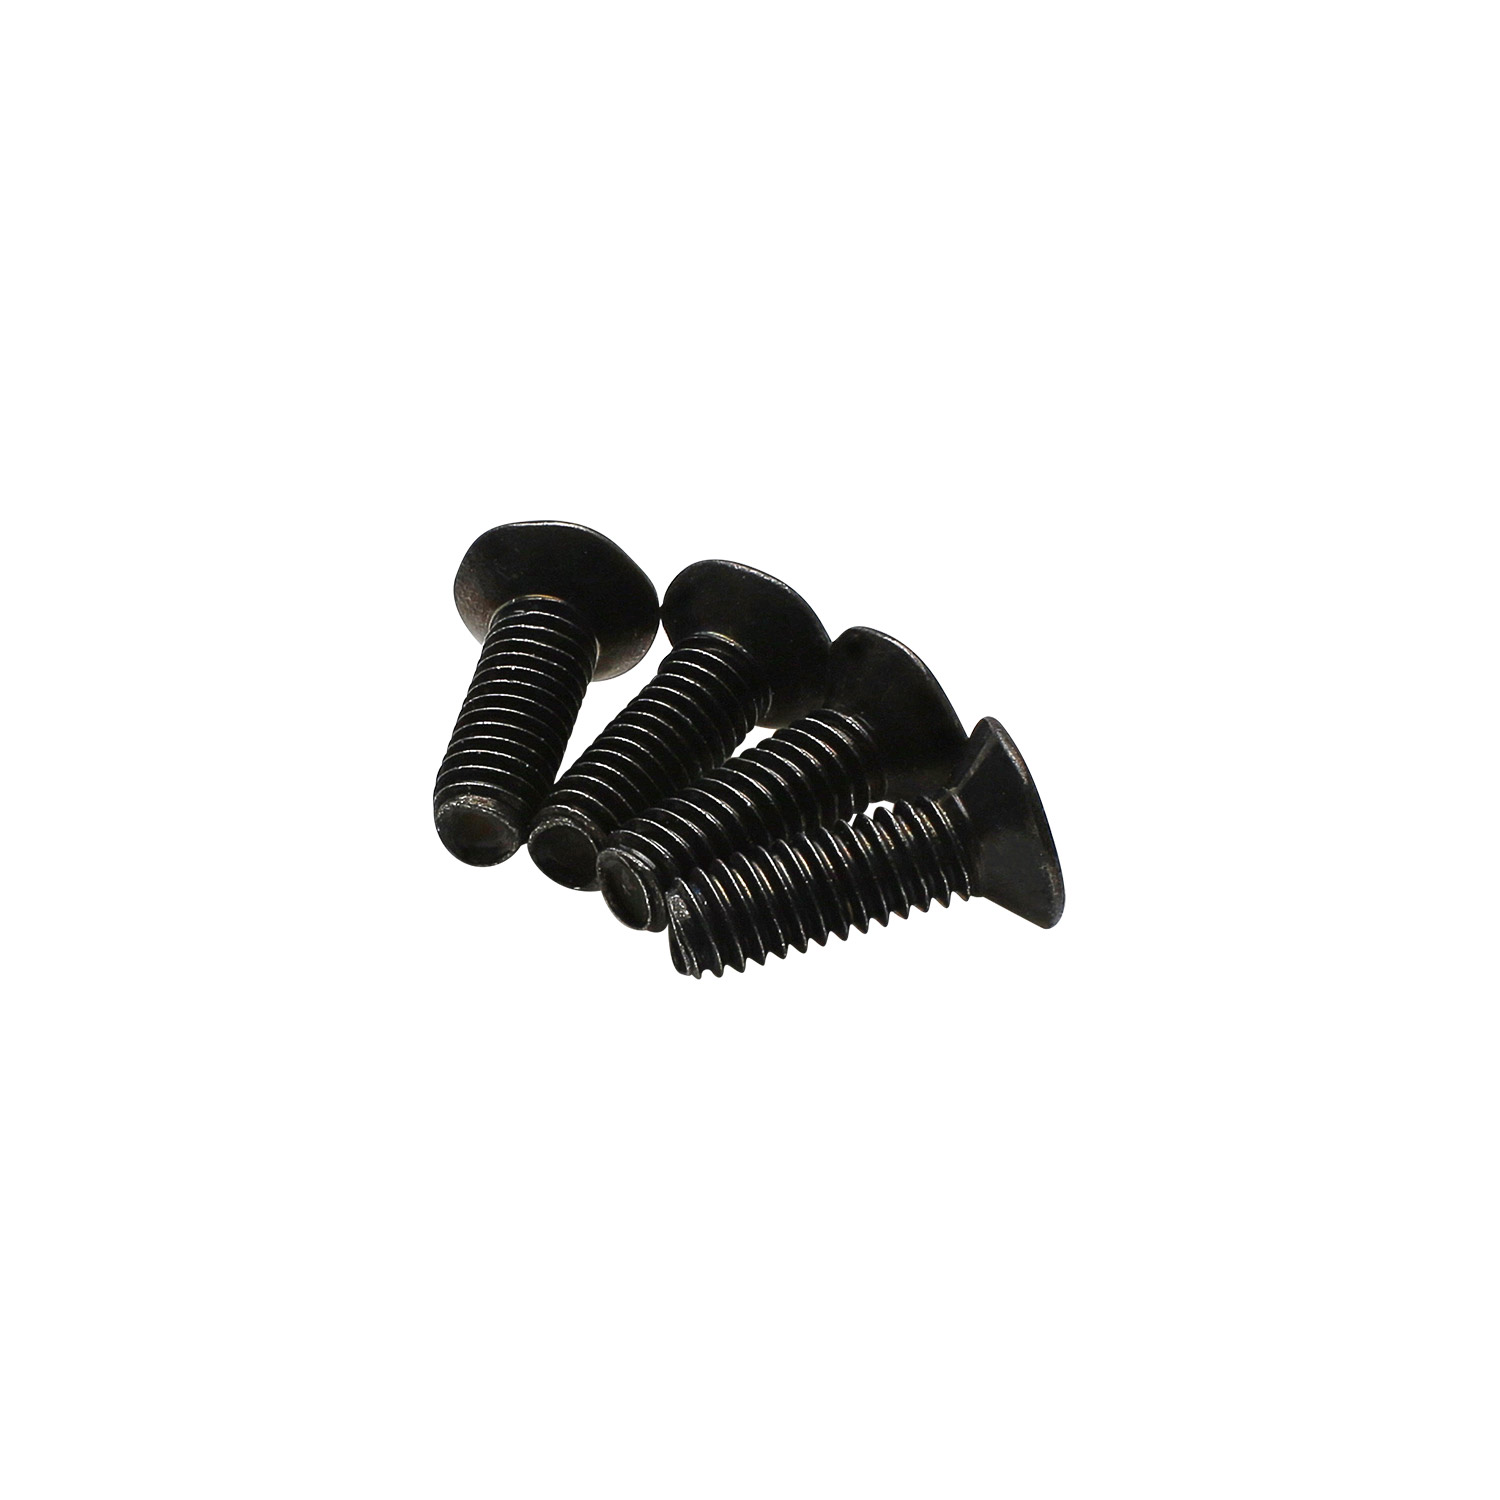 screw countersunk screw self tapping M2,5 x 8, Torx 8 for SYFB front plate mounting, colour: black